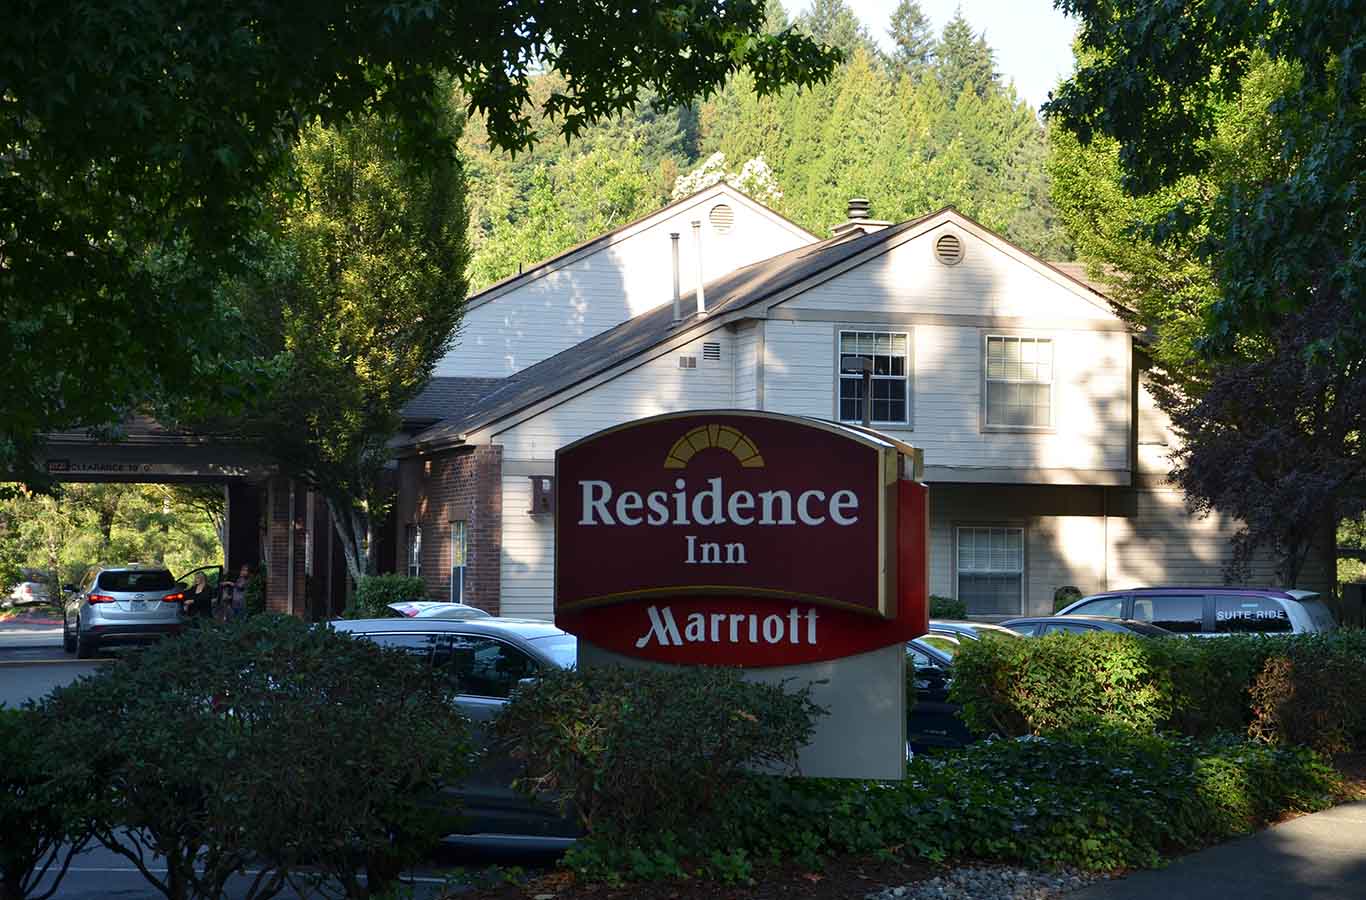 Hotels in Bothell